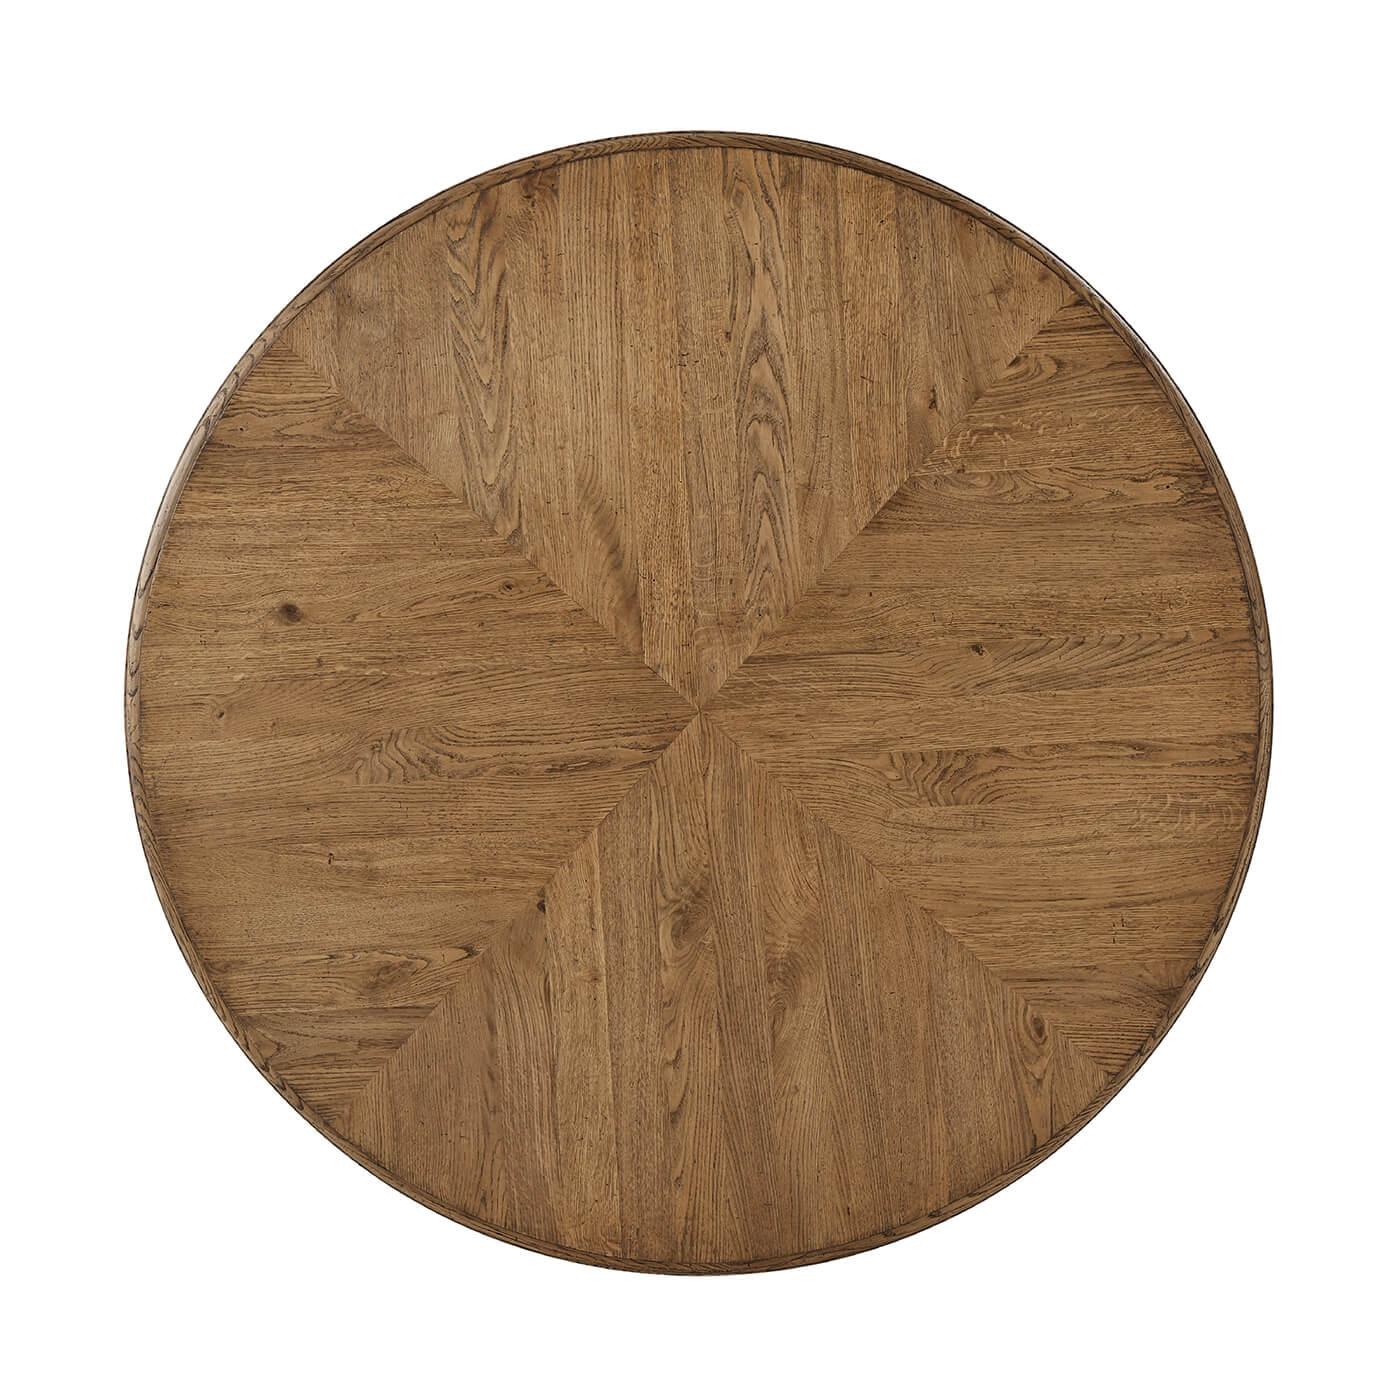 Modern Parquetry Round Coffee Table, Light Oak In New Condition For Sale In Westwood, NJ